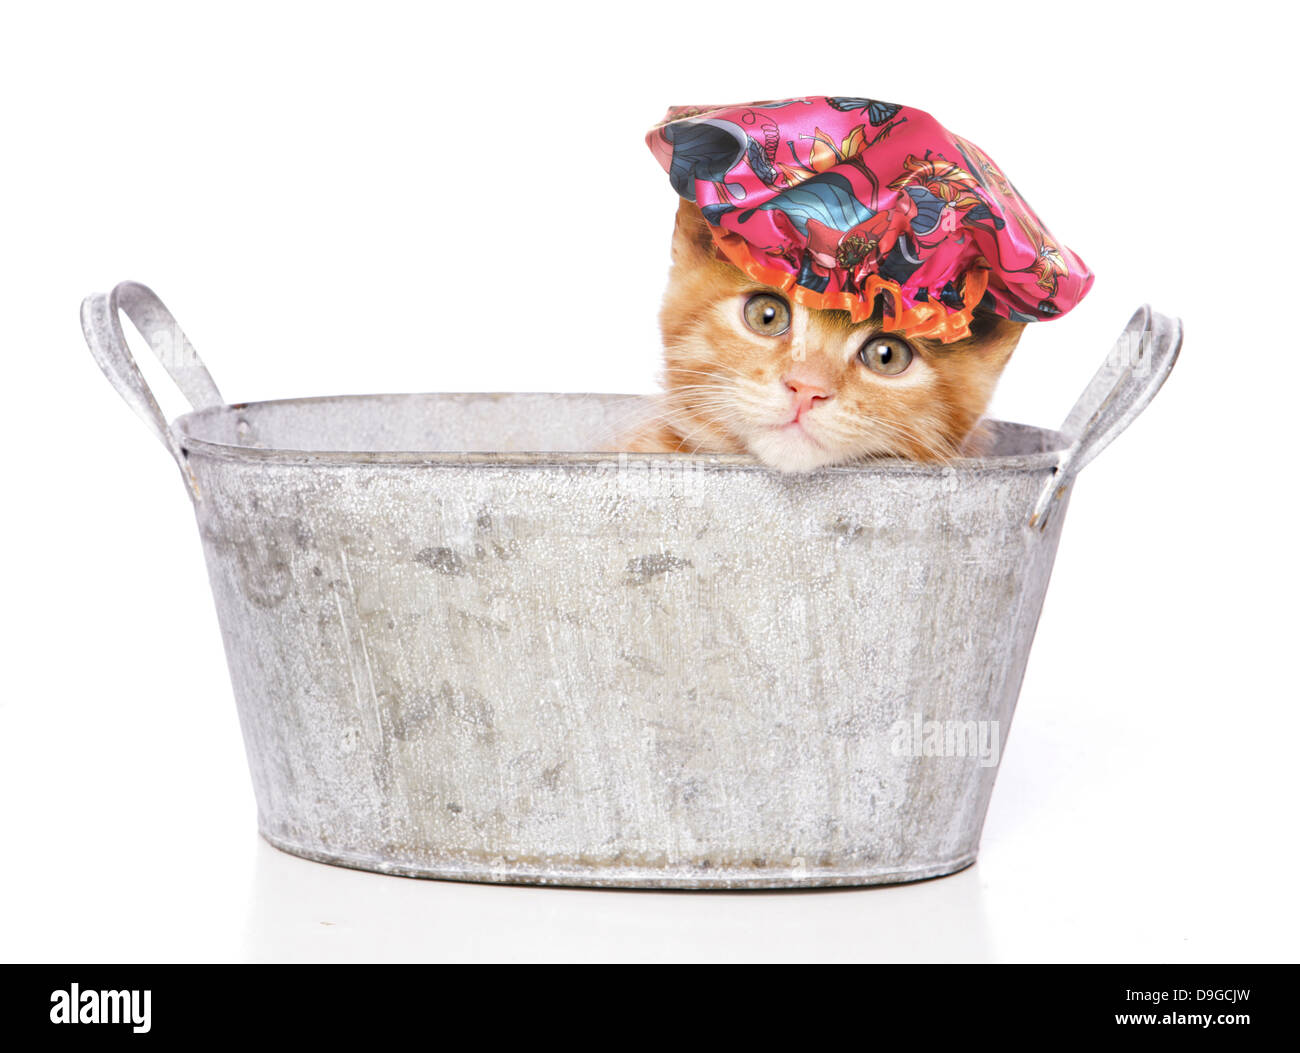 cat in a bath with shower cap Stock Photo